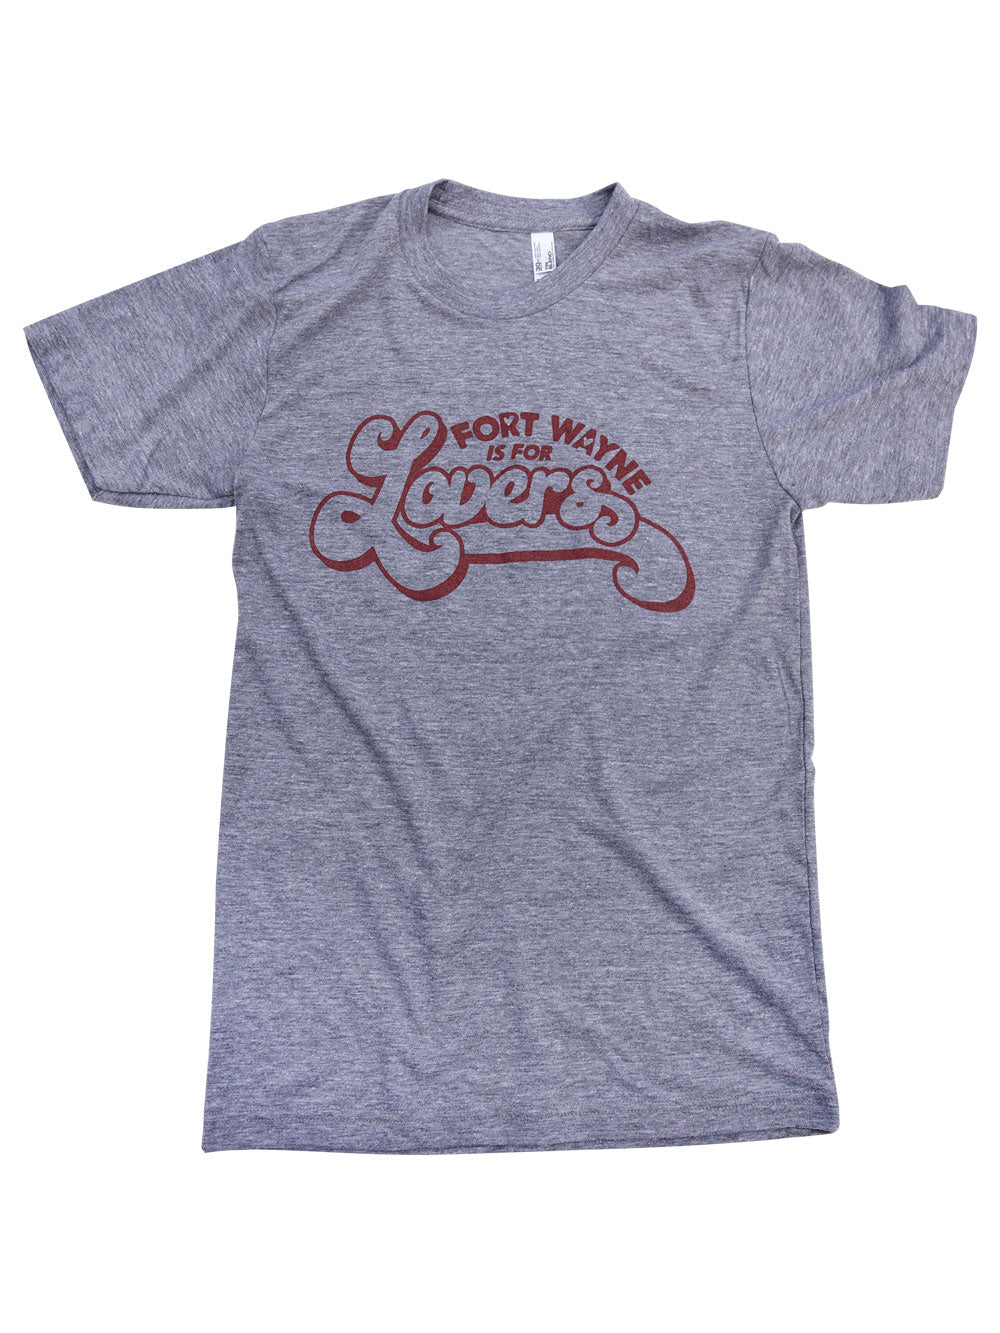 Fort Wayne is for Lovers t-shirt in gray heather 